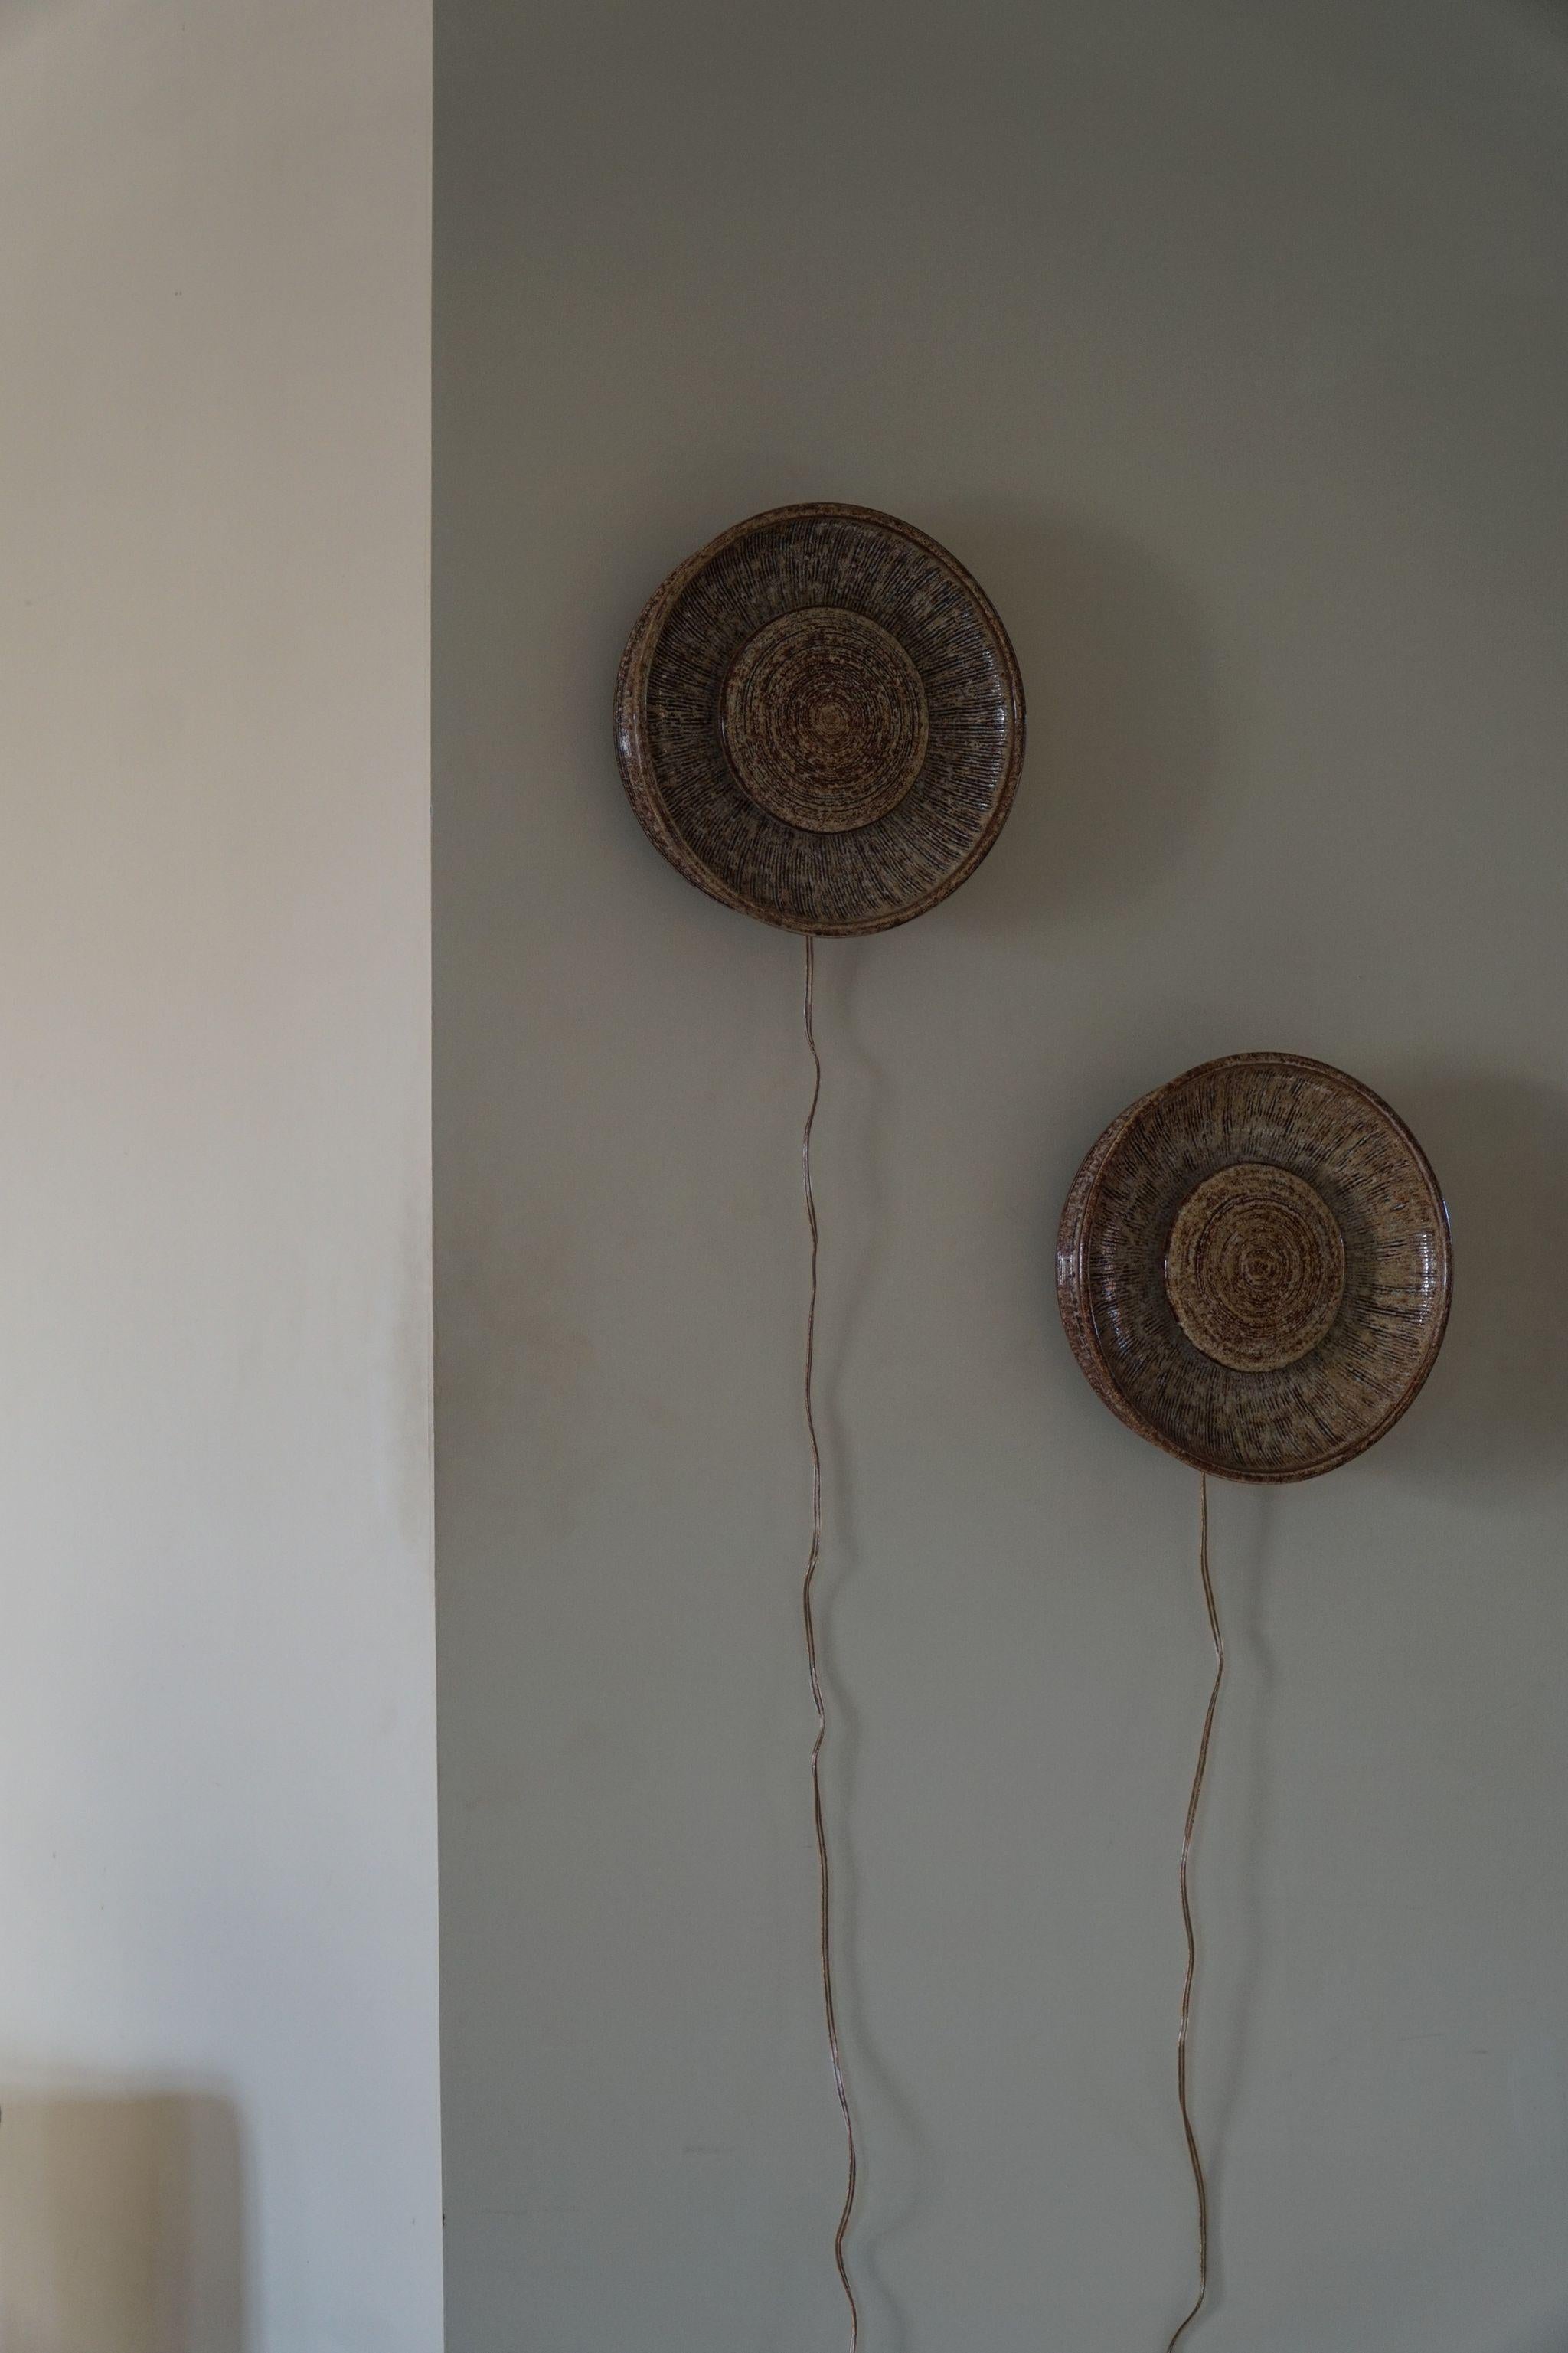 A pair of danish ceramic wall lamps from the 1970s, produced by the Danish company Dagnæs. These decorative wall lamps is made of ceramic in various shades of brown. 

The pair is in a great vintage condition. 

Other honorable mentions from